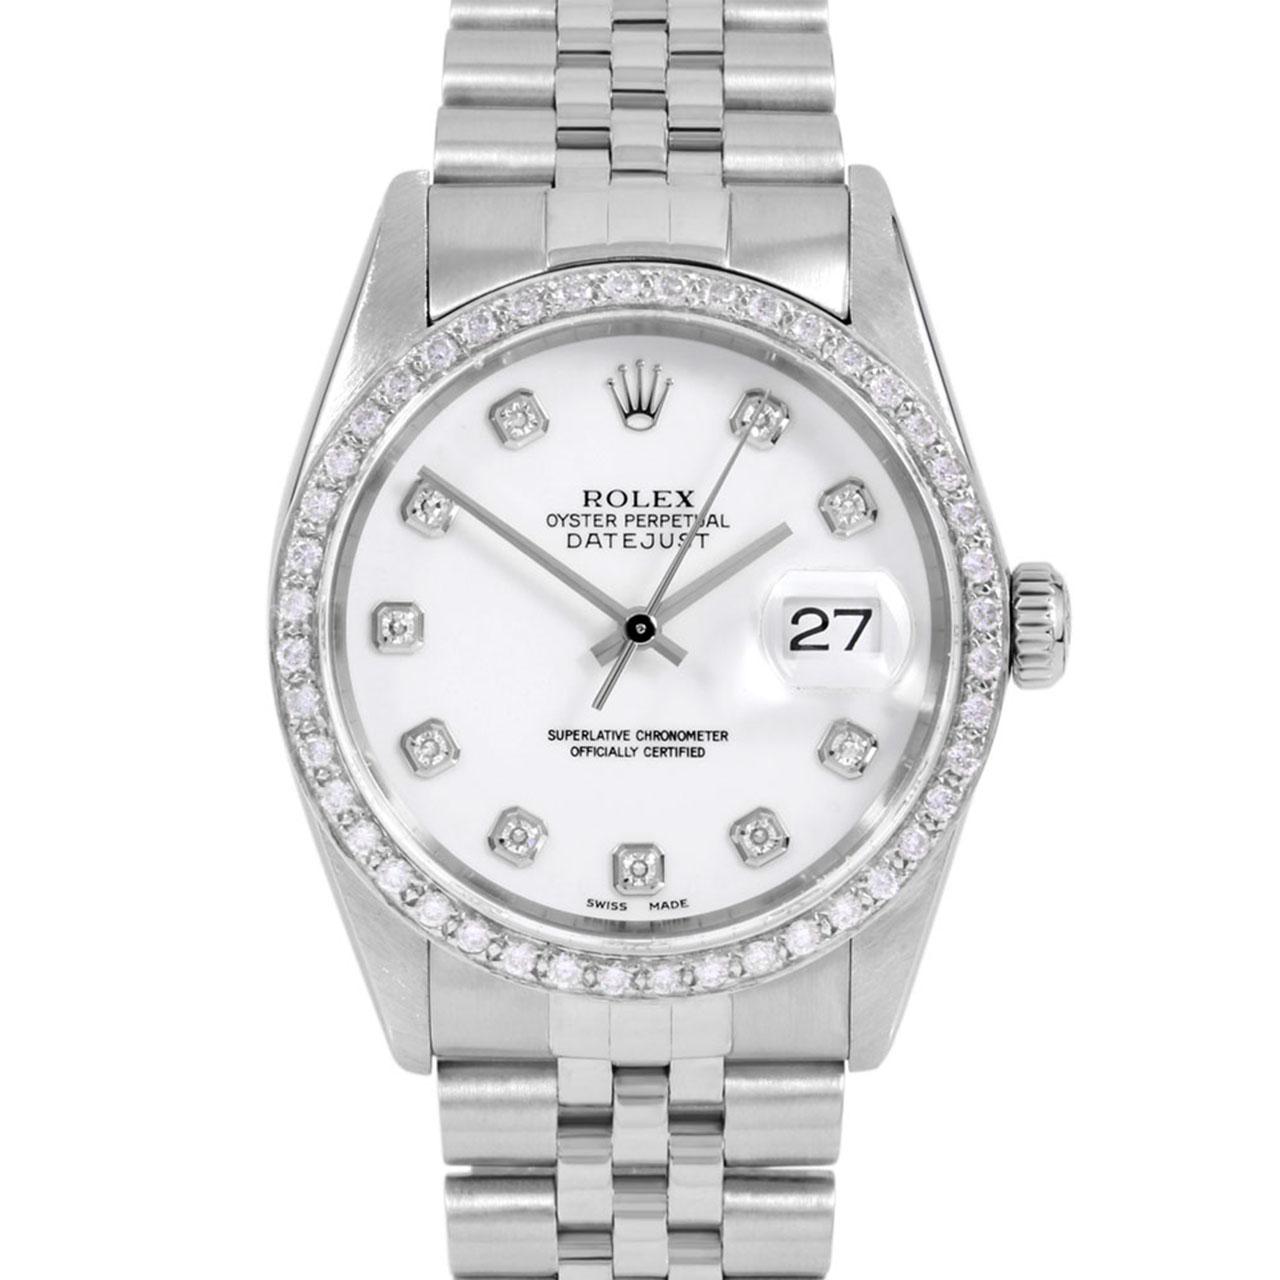 Swiss Wrist - SKU 16014-WHT-DIA-AM-BDS-JBL

Brand : Rolex
Model : Datejust Ref# 16014 - Plastic Quickset Model 
Gender : Mens
Metals :  Stainless Steel
Case Size : 36 mm
Dial : Custom White Diamond Dial (This dial is not original Rolex And has been